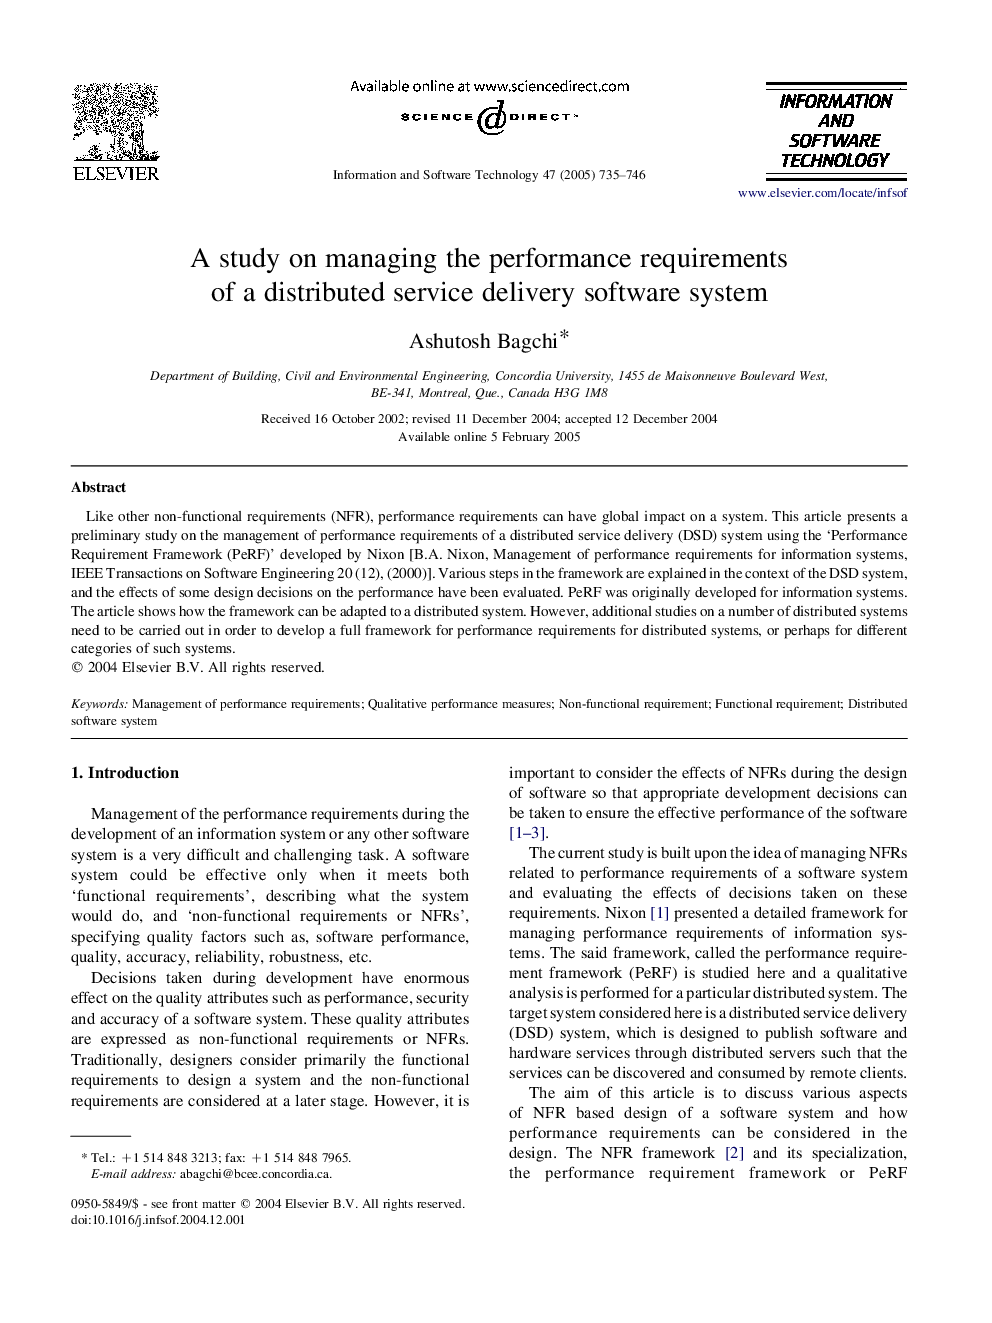 A study on managing the performance requirements of a distributed service delivery software system